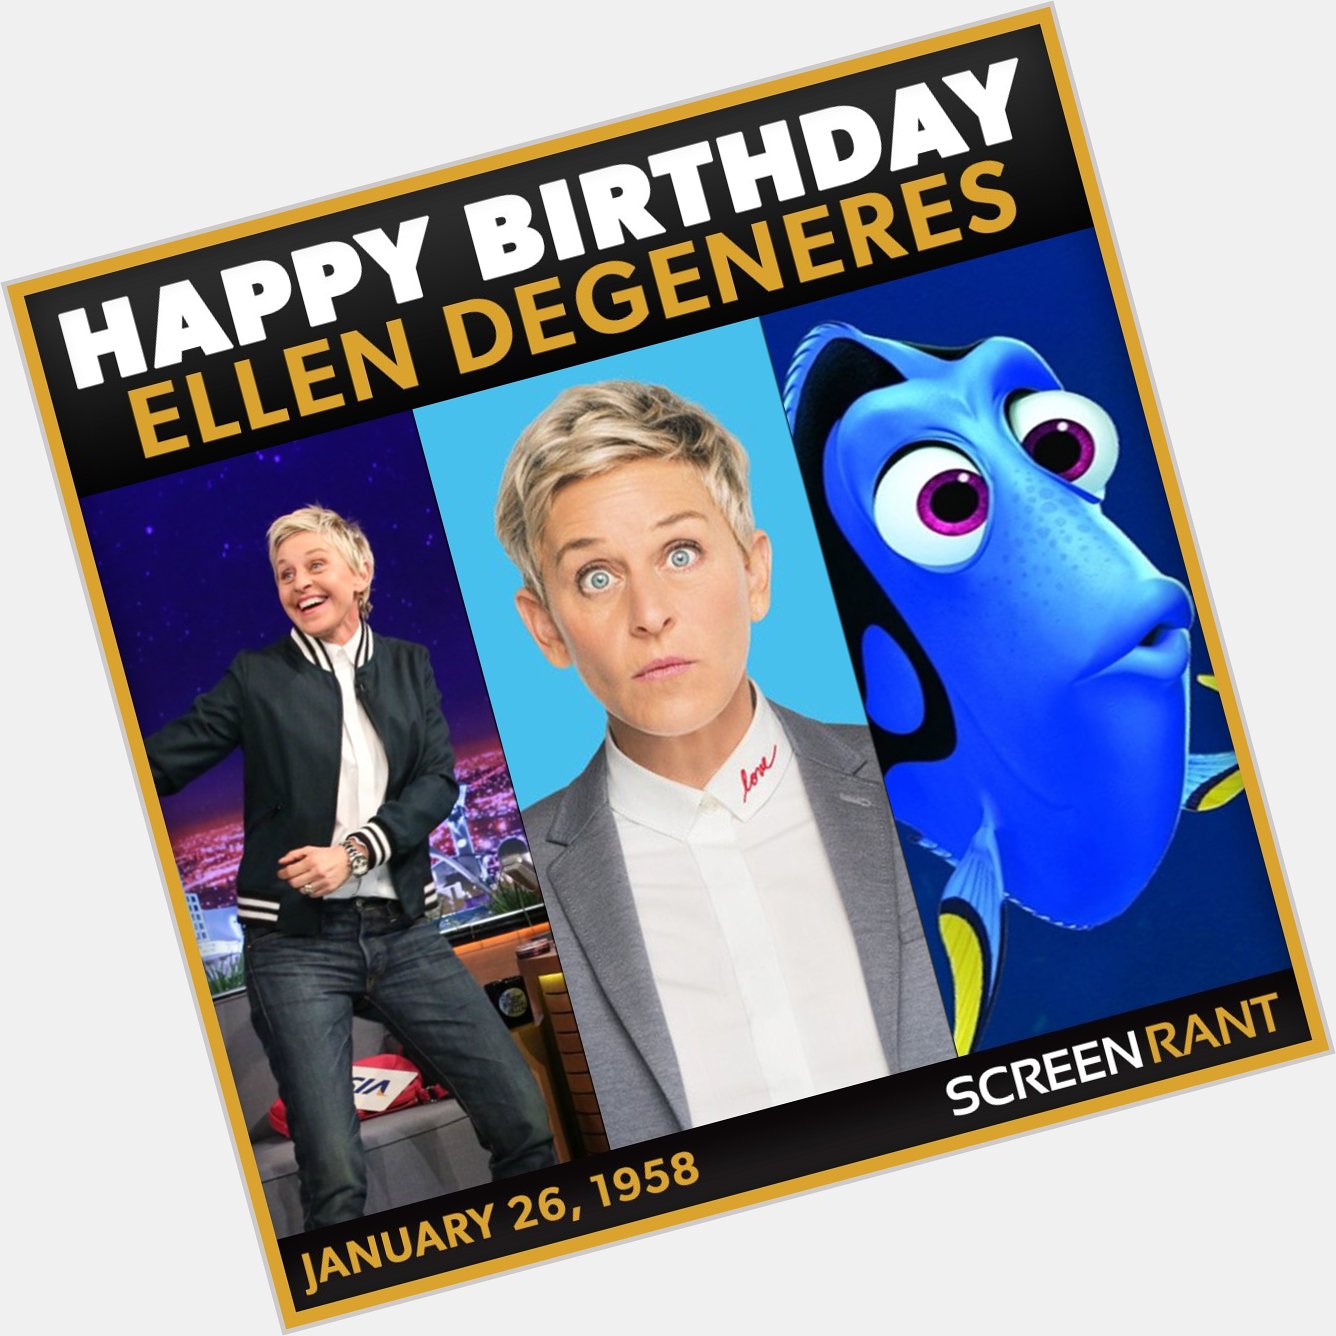 Happy Birthday, Ellen DeGeneres! From Dory to talk show host, which moments are your favorite? 